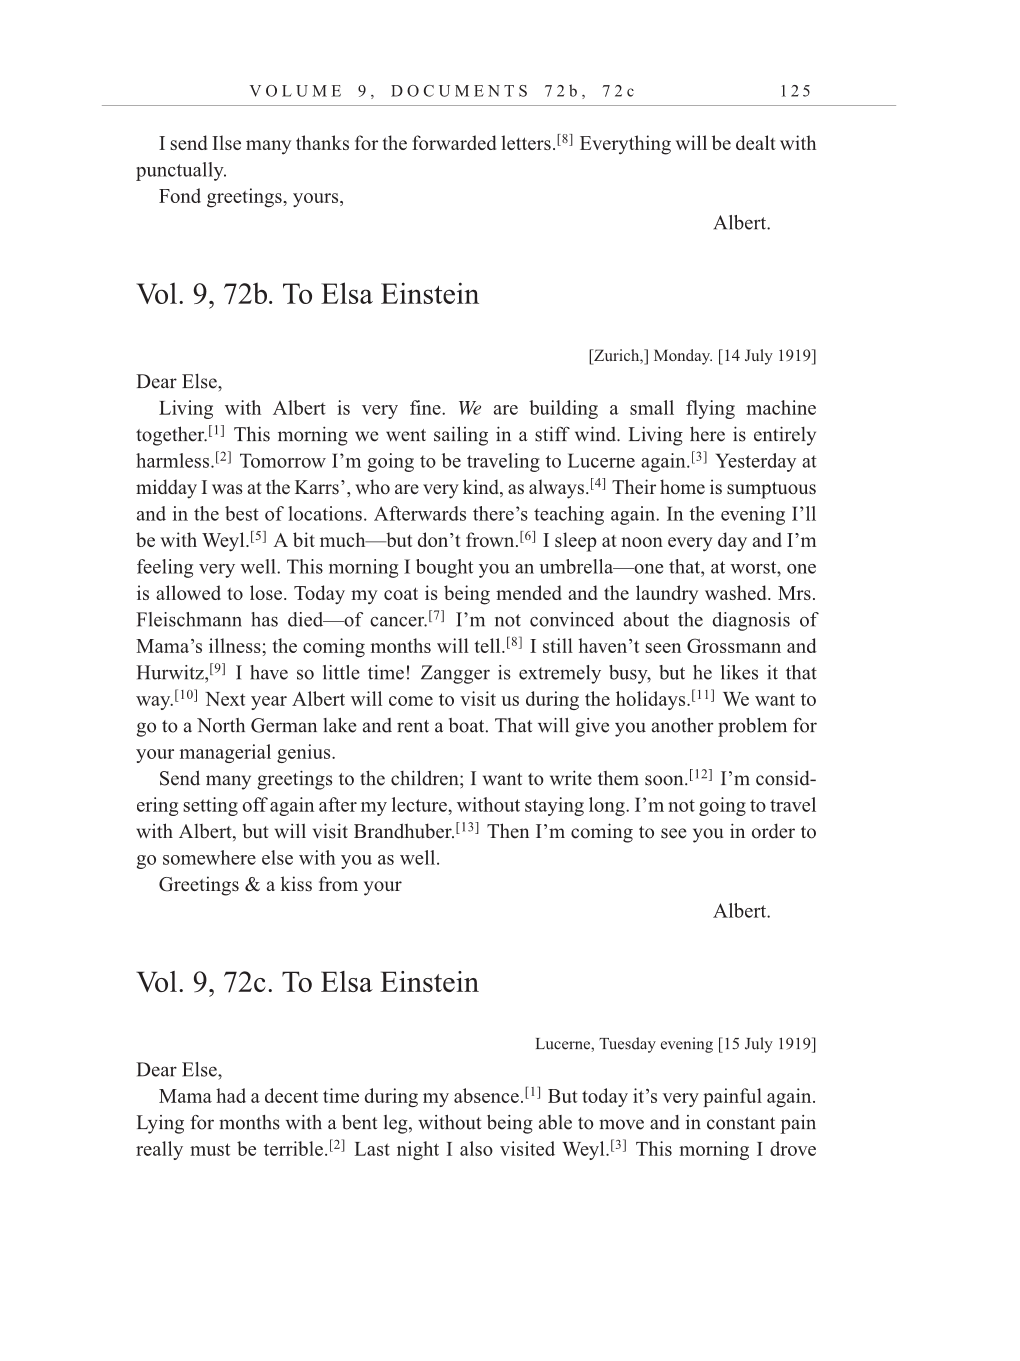 Volume 10: The Berlin Years: Correspondence, May-December 1920, and Supplementary Correspondence, 1909-1920 (English translation supplement) page 125